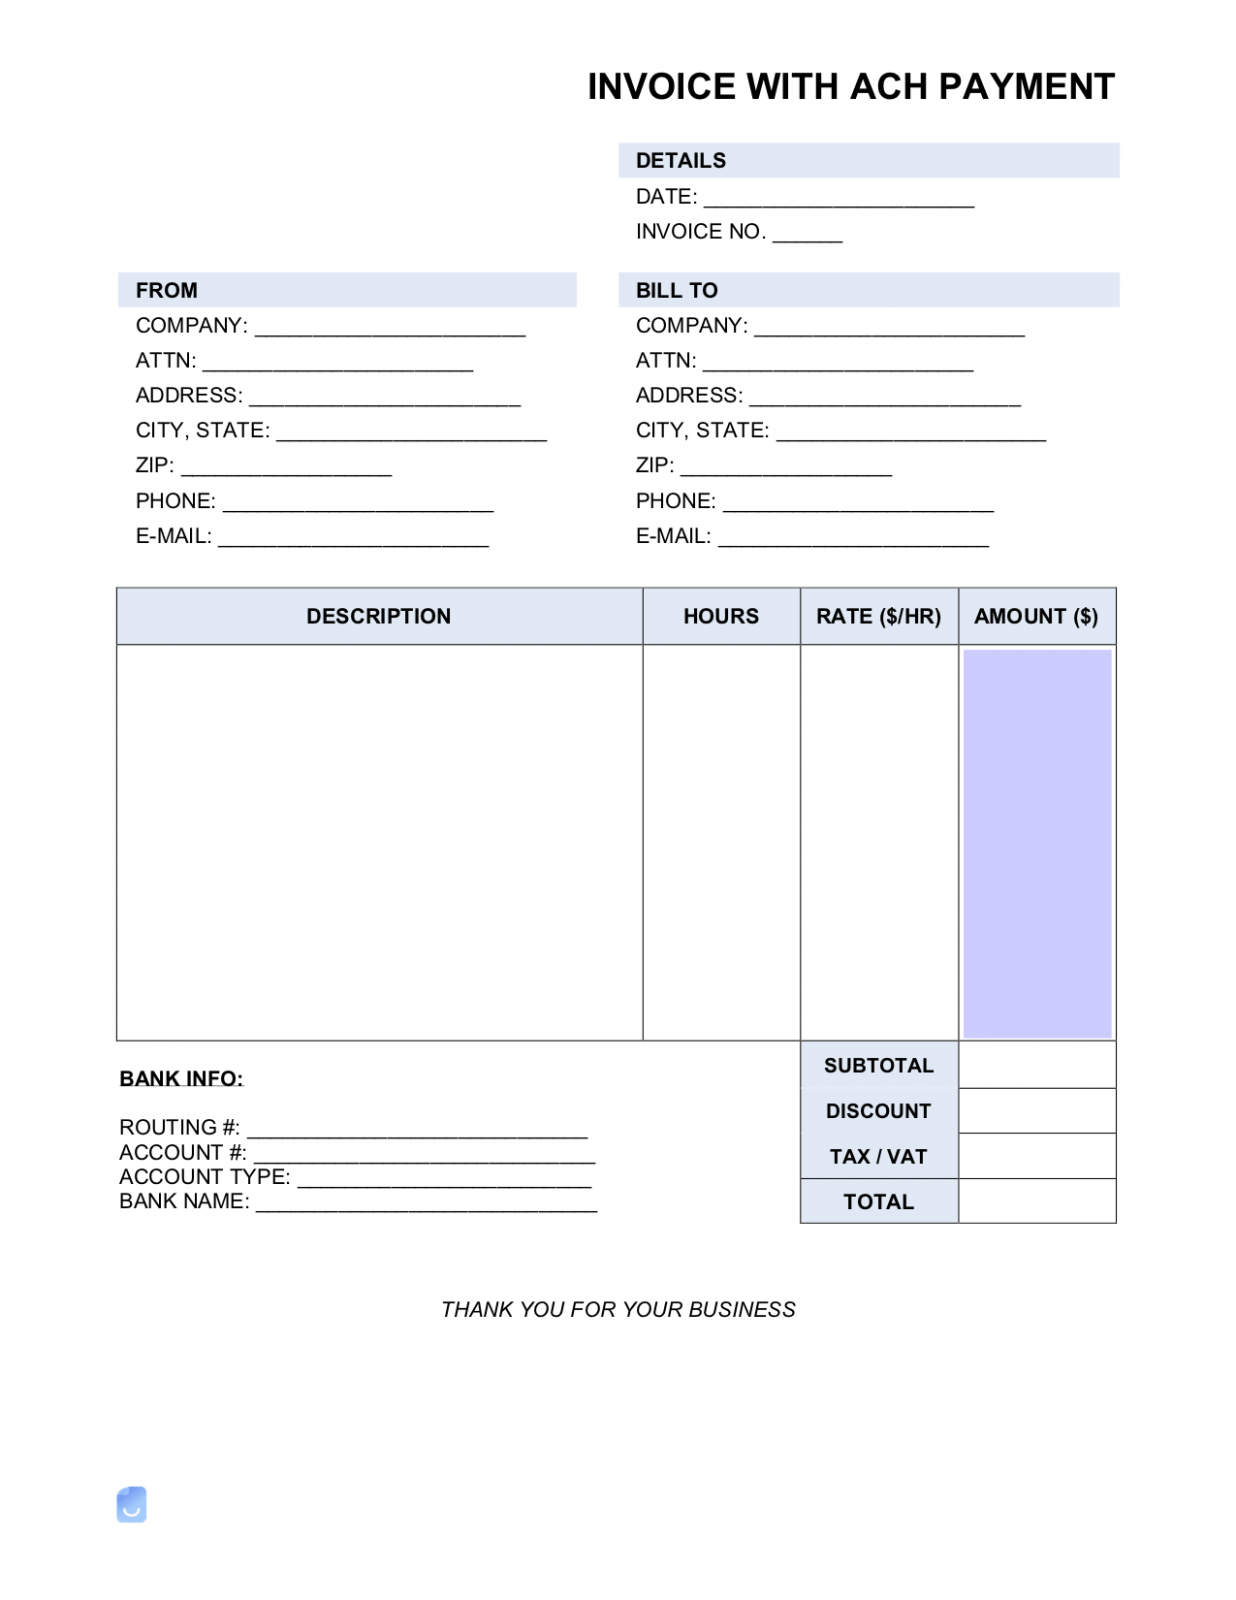 Printable Bank Details Invoice Template 